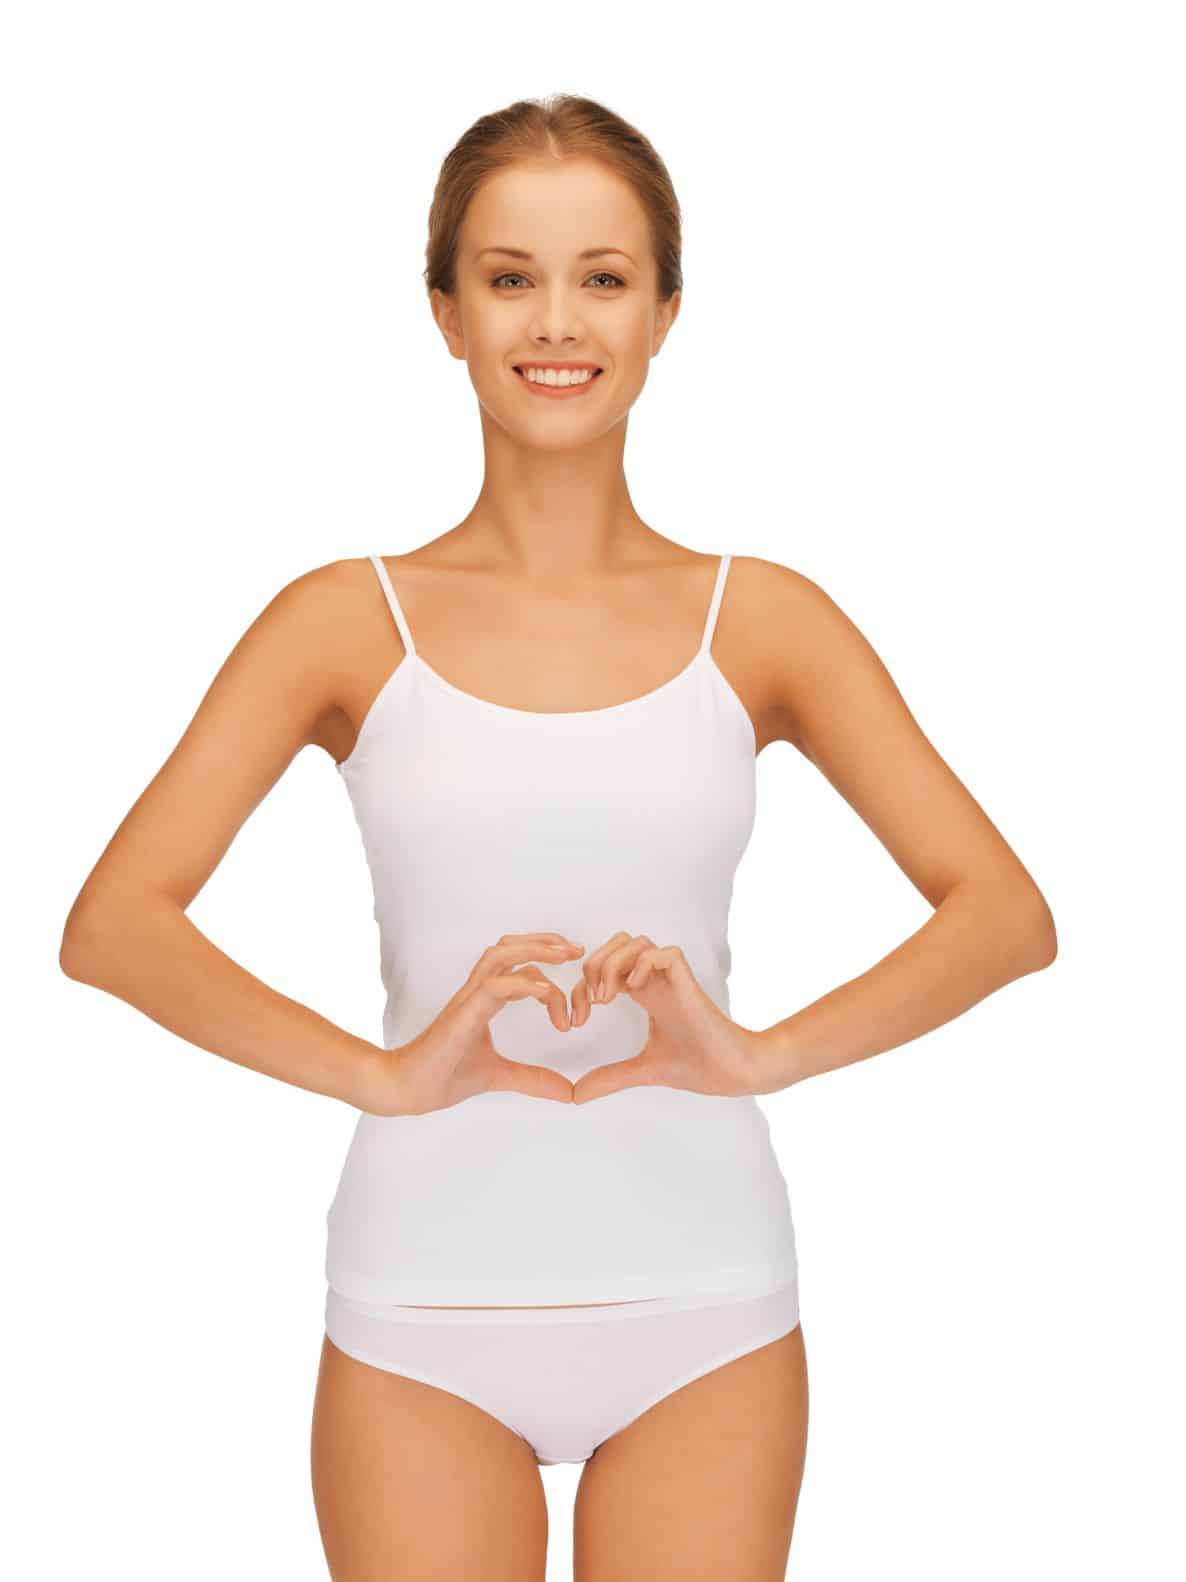 15691684 - picture of beautiful woman in cotton undrewear forming heart shape on belly